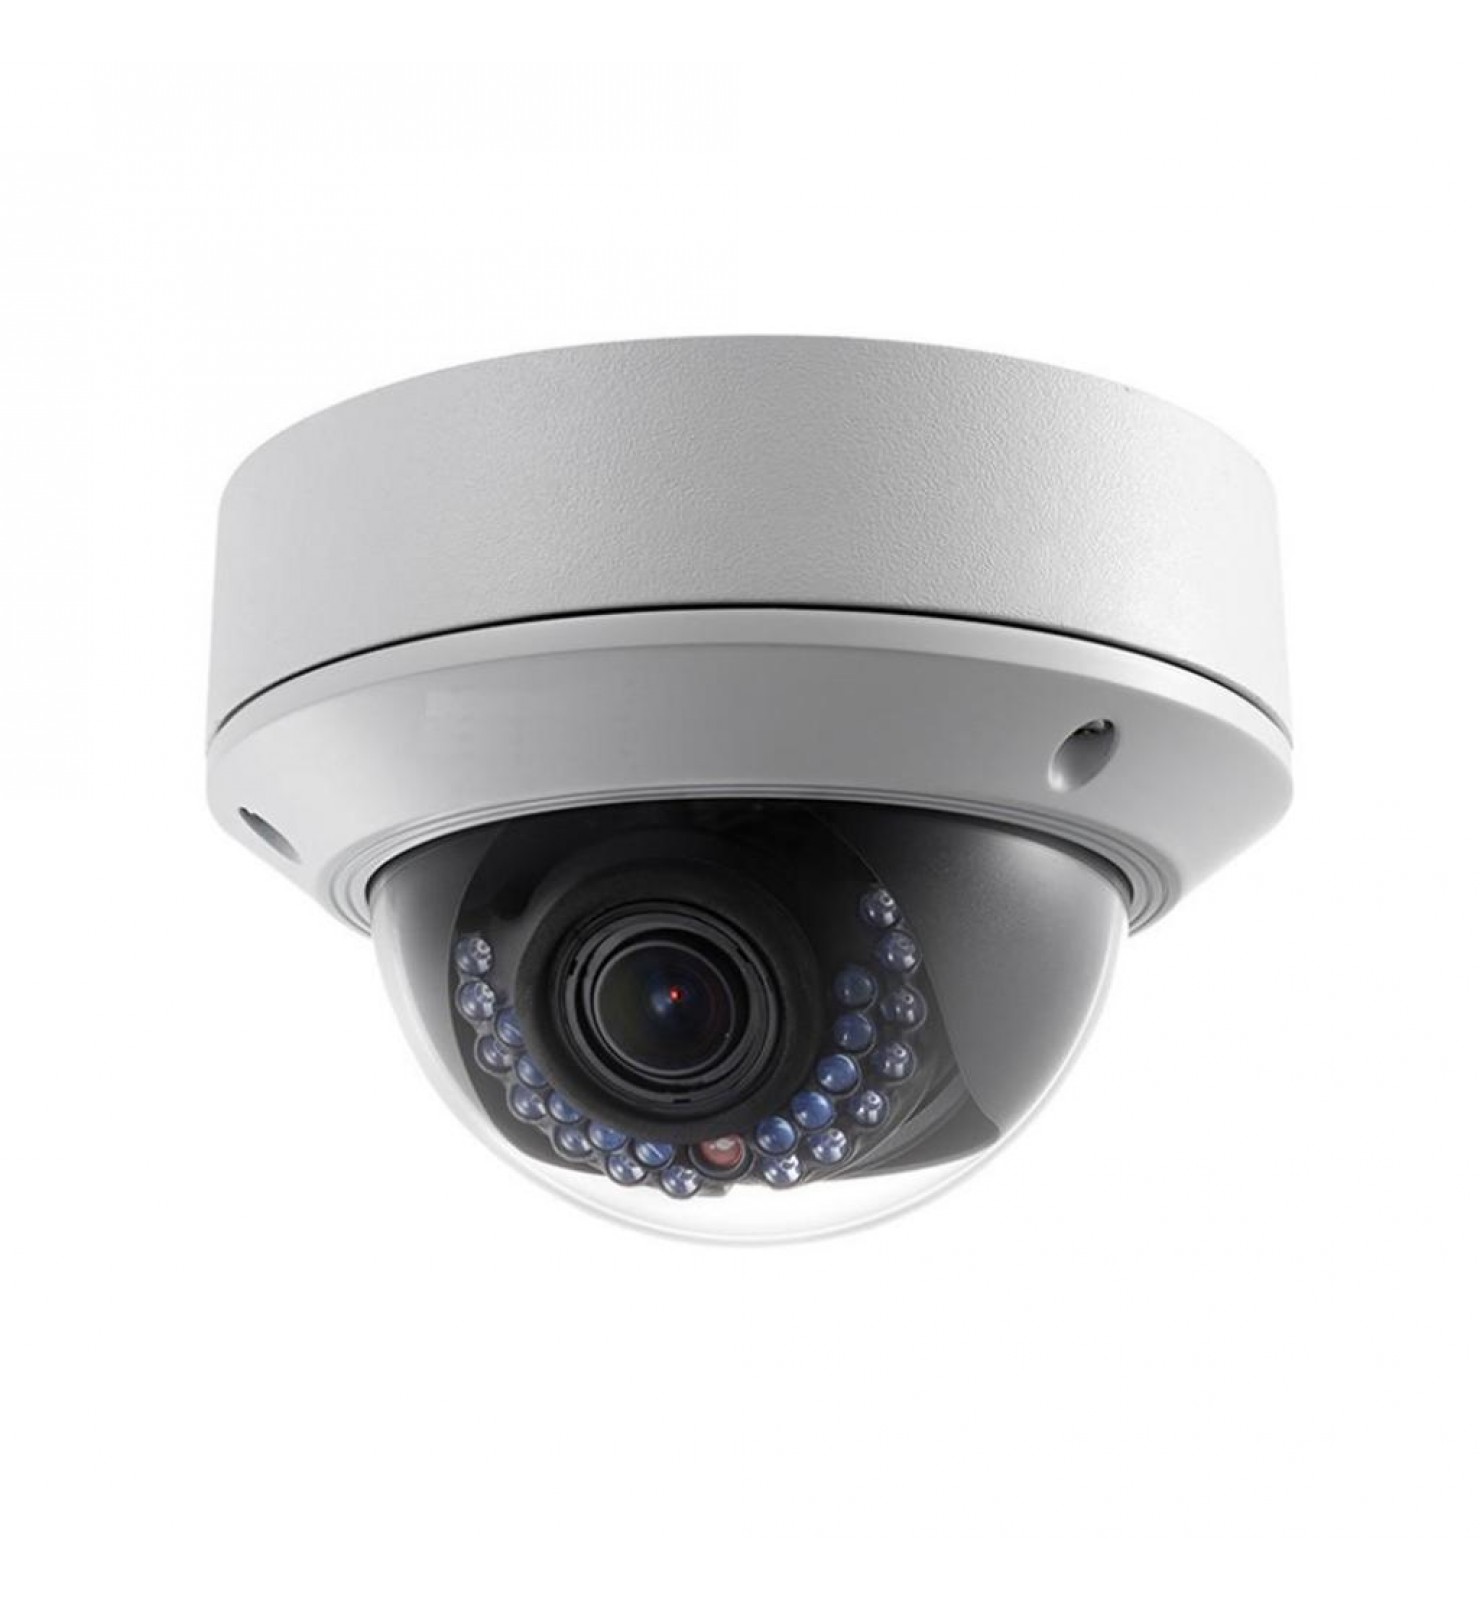 Камера Hikvision DS-2CD2742FWD-IS